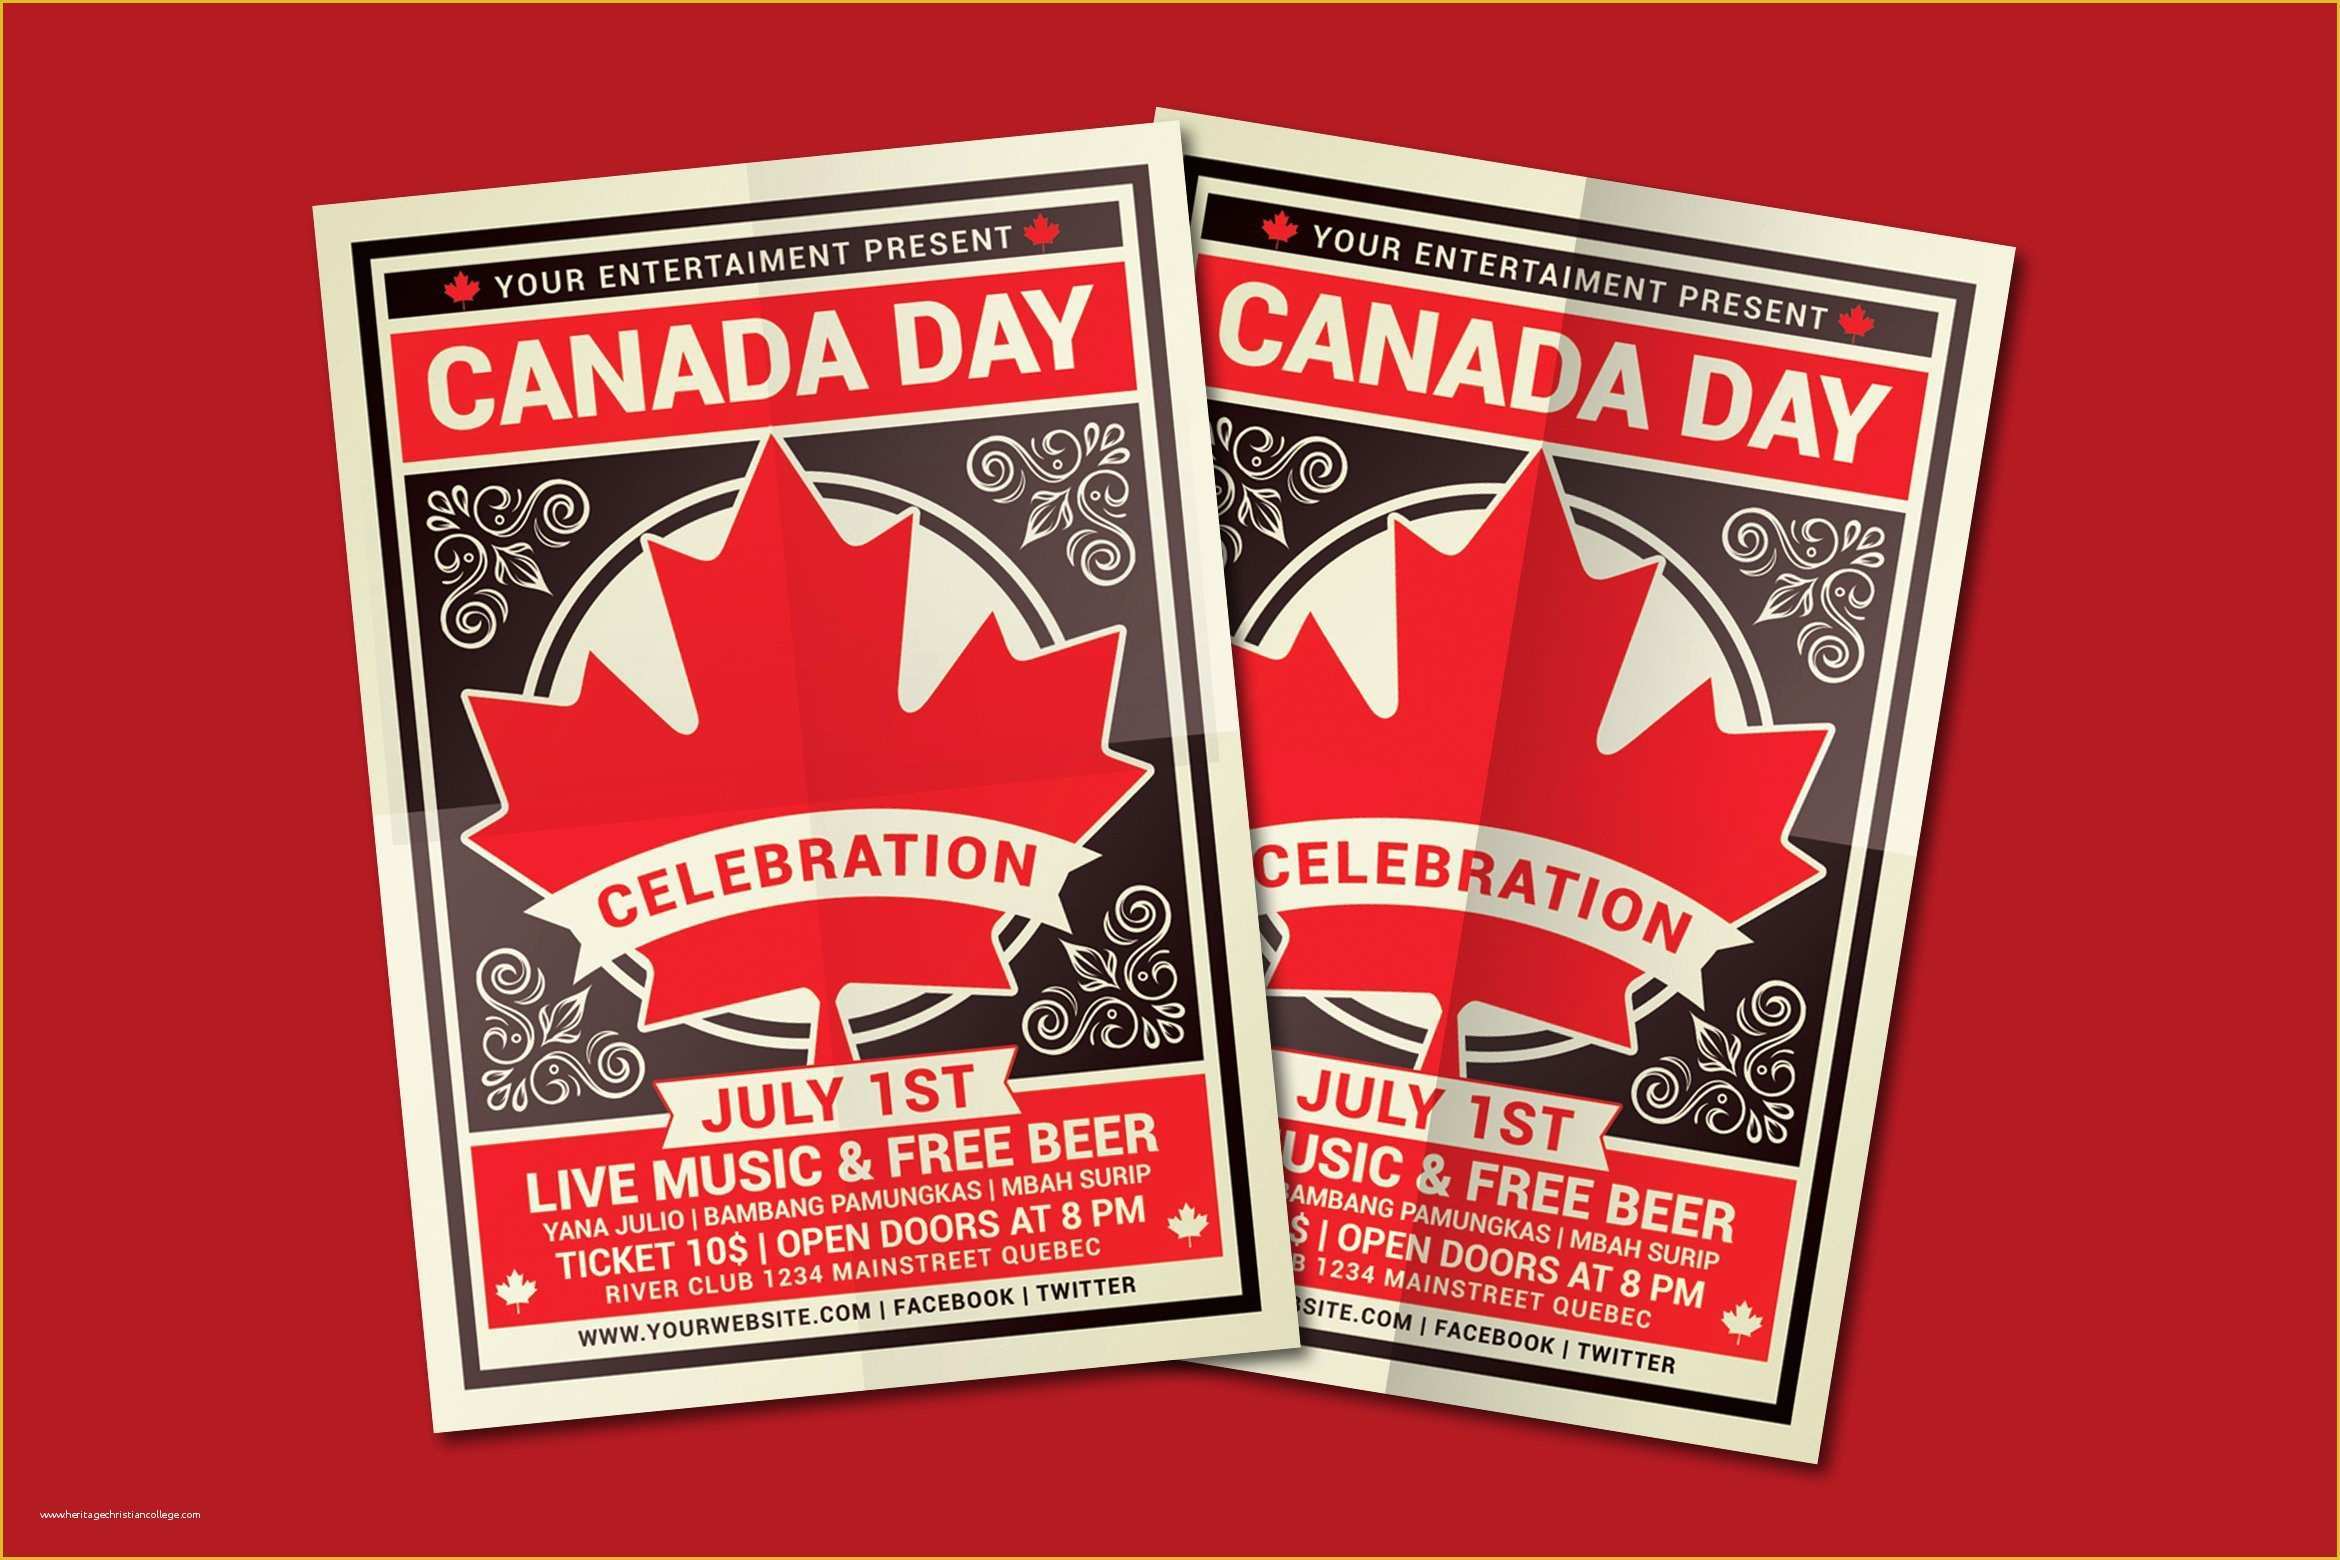 Canada Day Flyer Template Free Of Canada Day Flyer Template Flyer Templates Creative Market